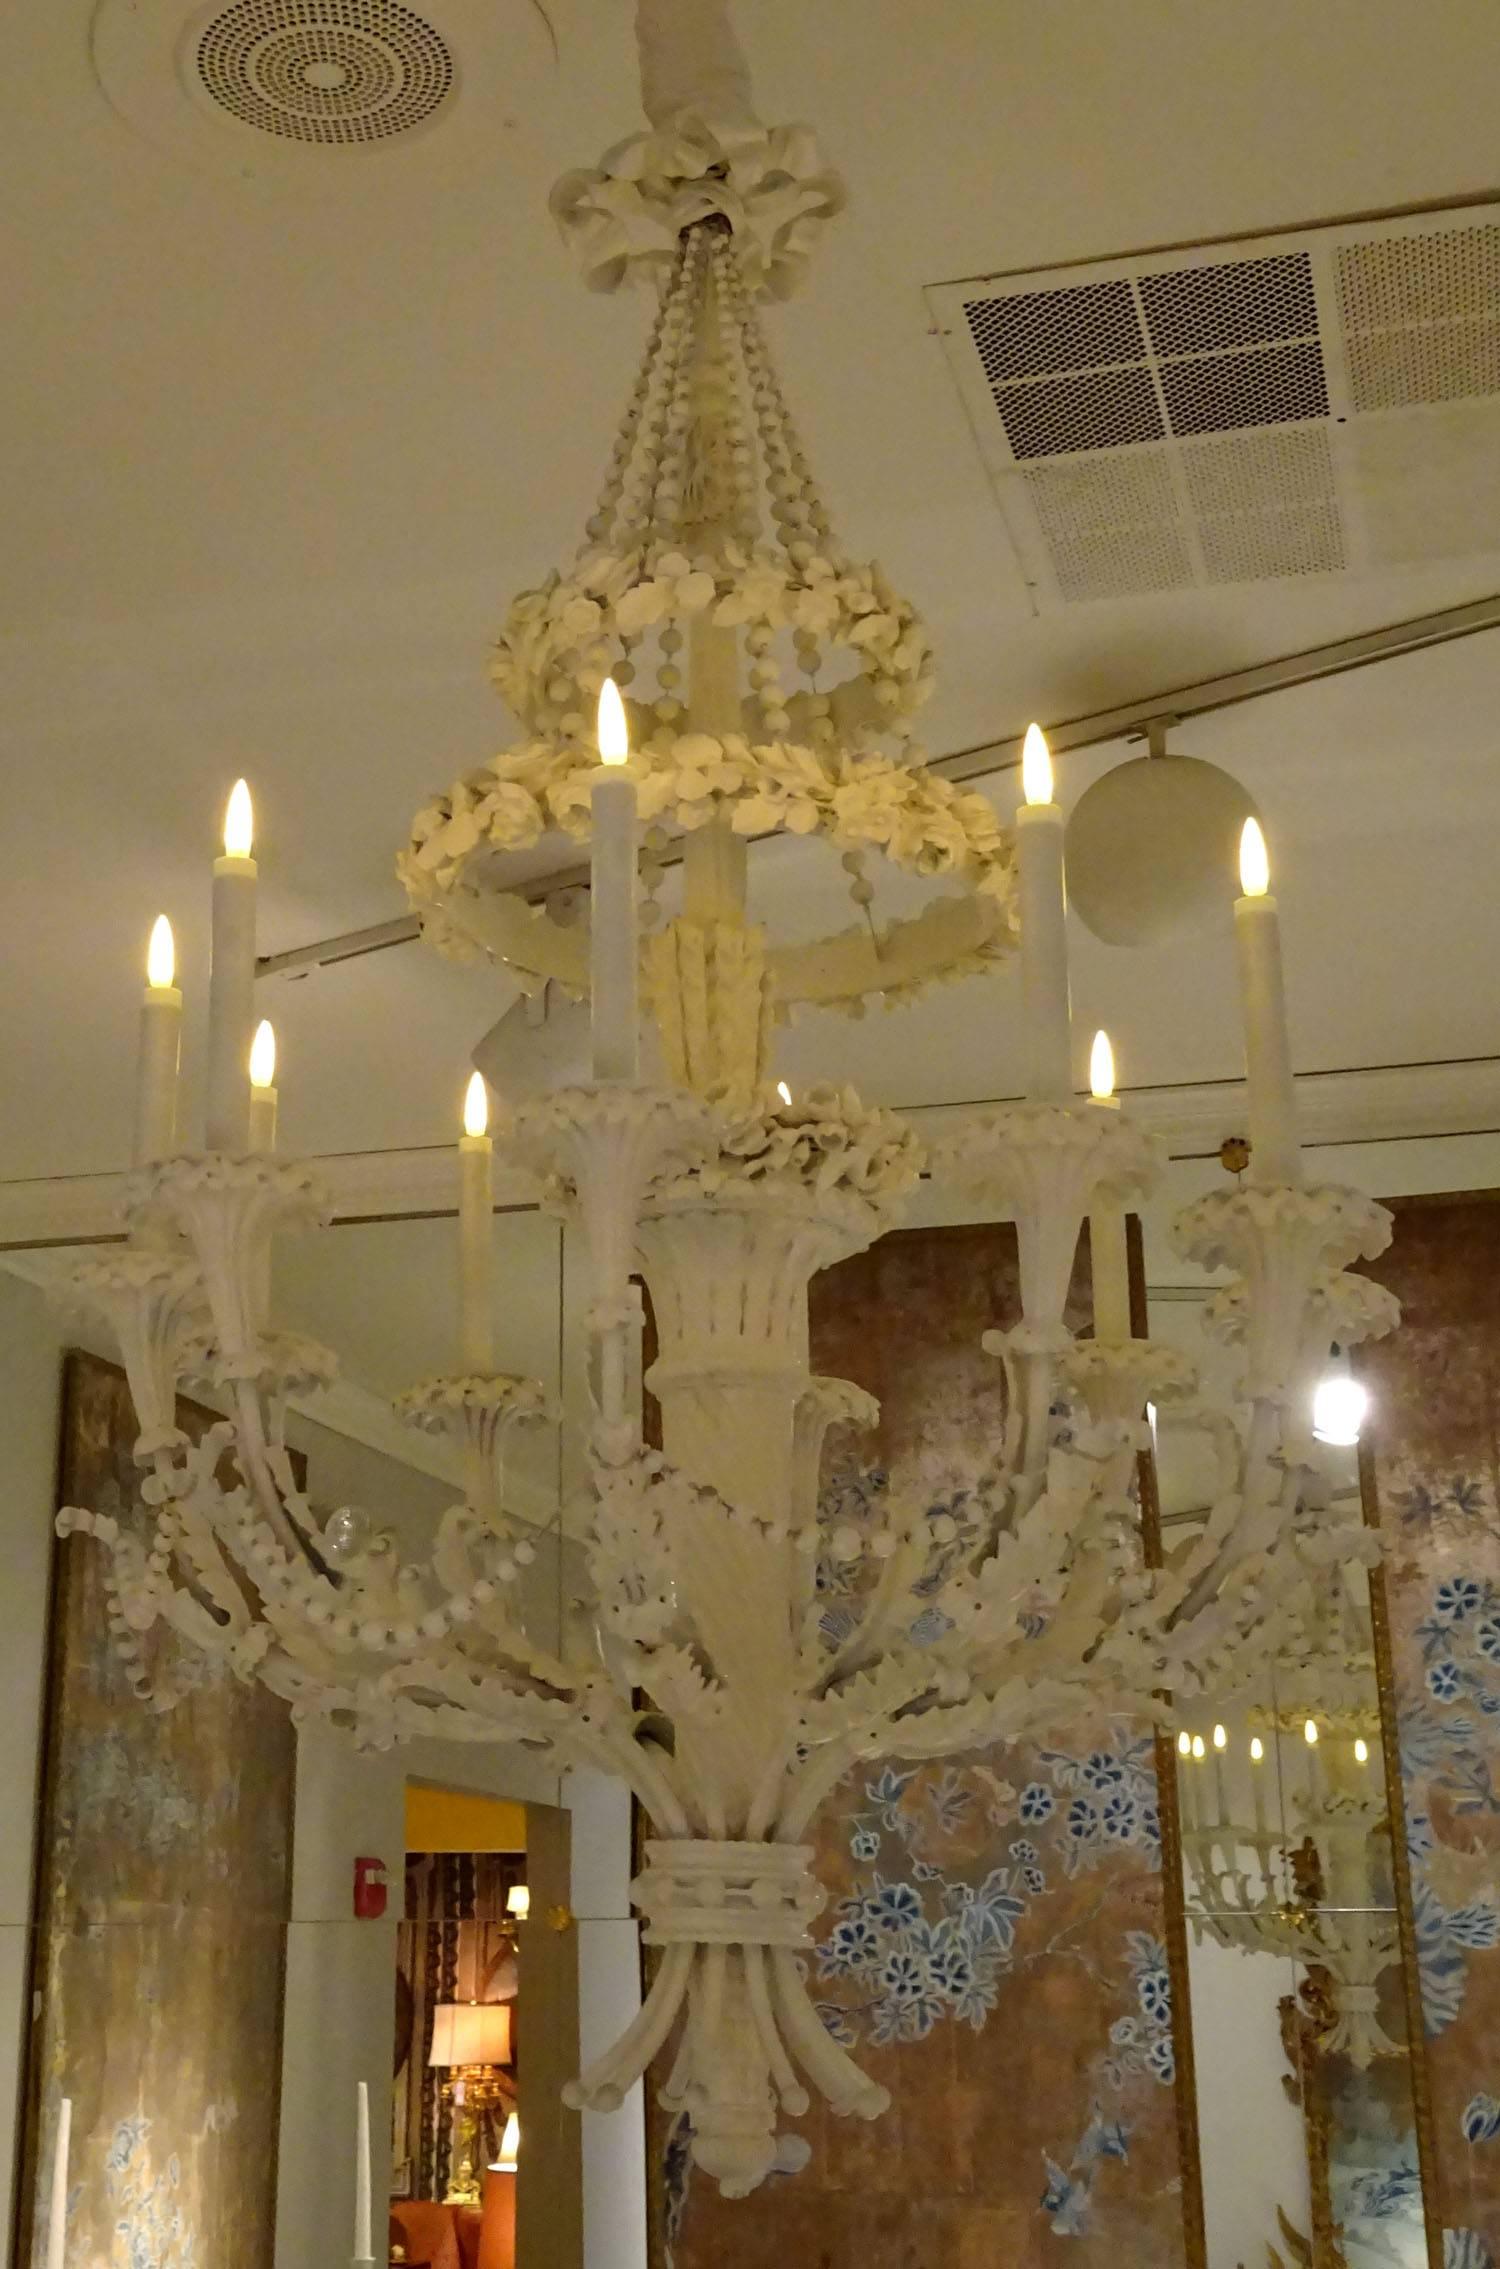 20th century continental chandelier of ornately carved wood in a painted white finish.